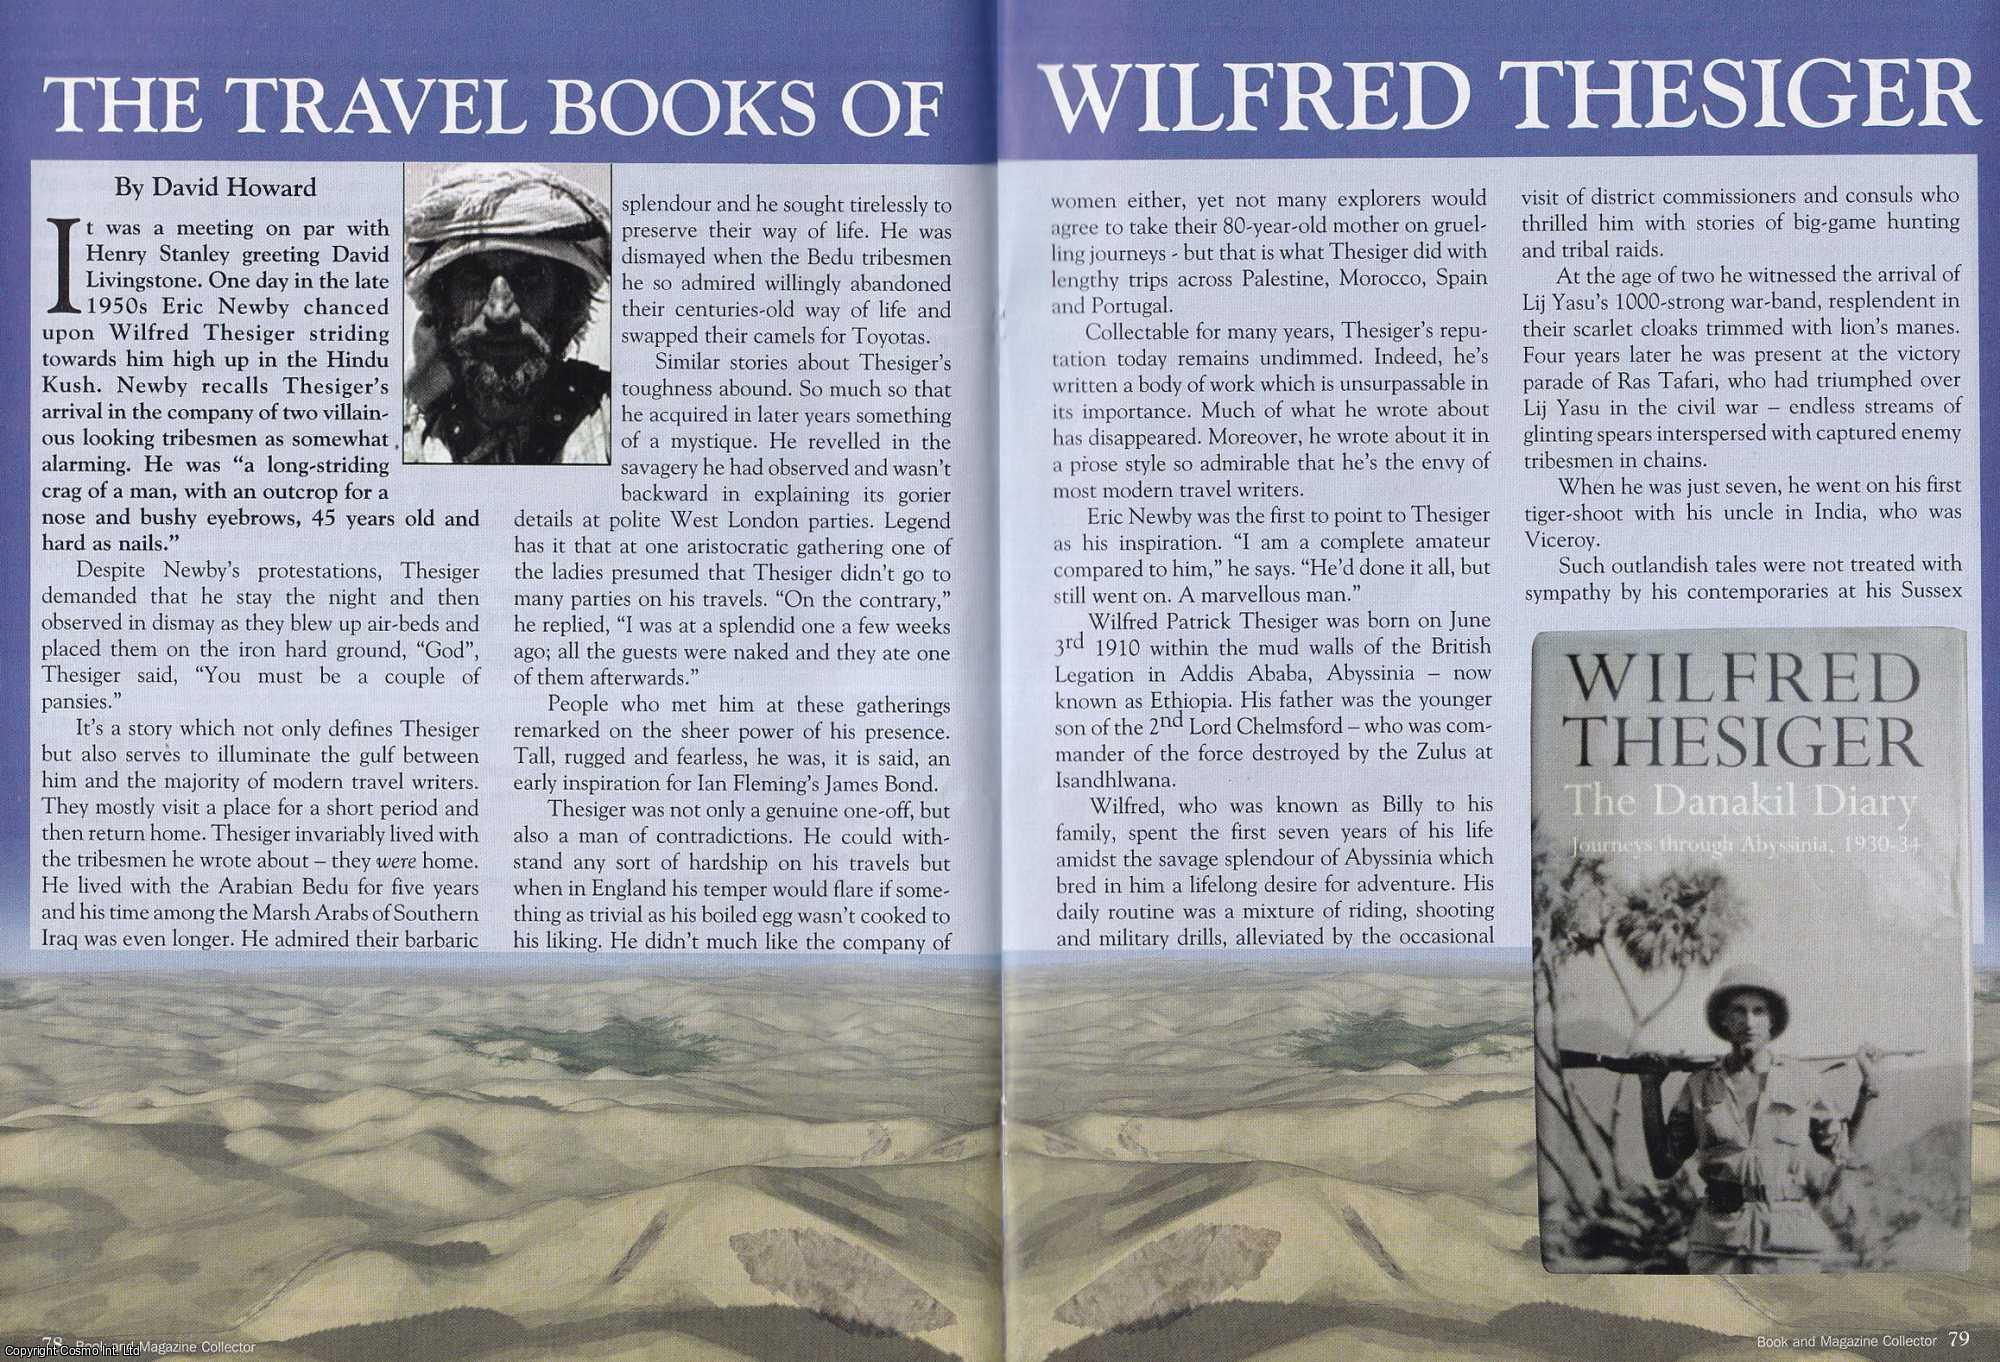 David Howard - The Travel Books of Wilfred Thesiger. This is an original article separated from an issue of The Book & Magazine Collector publication, 2008.